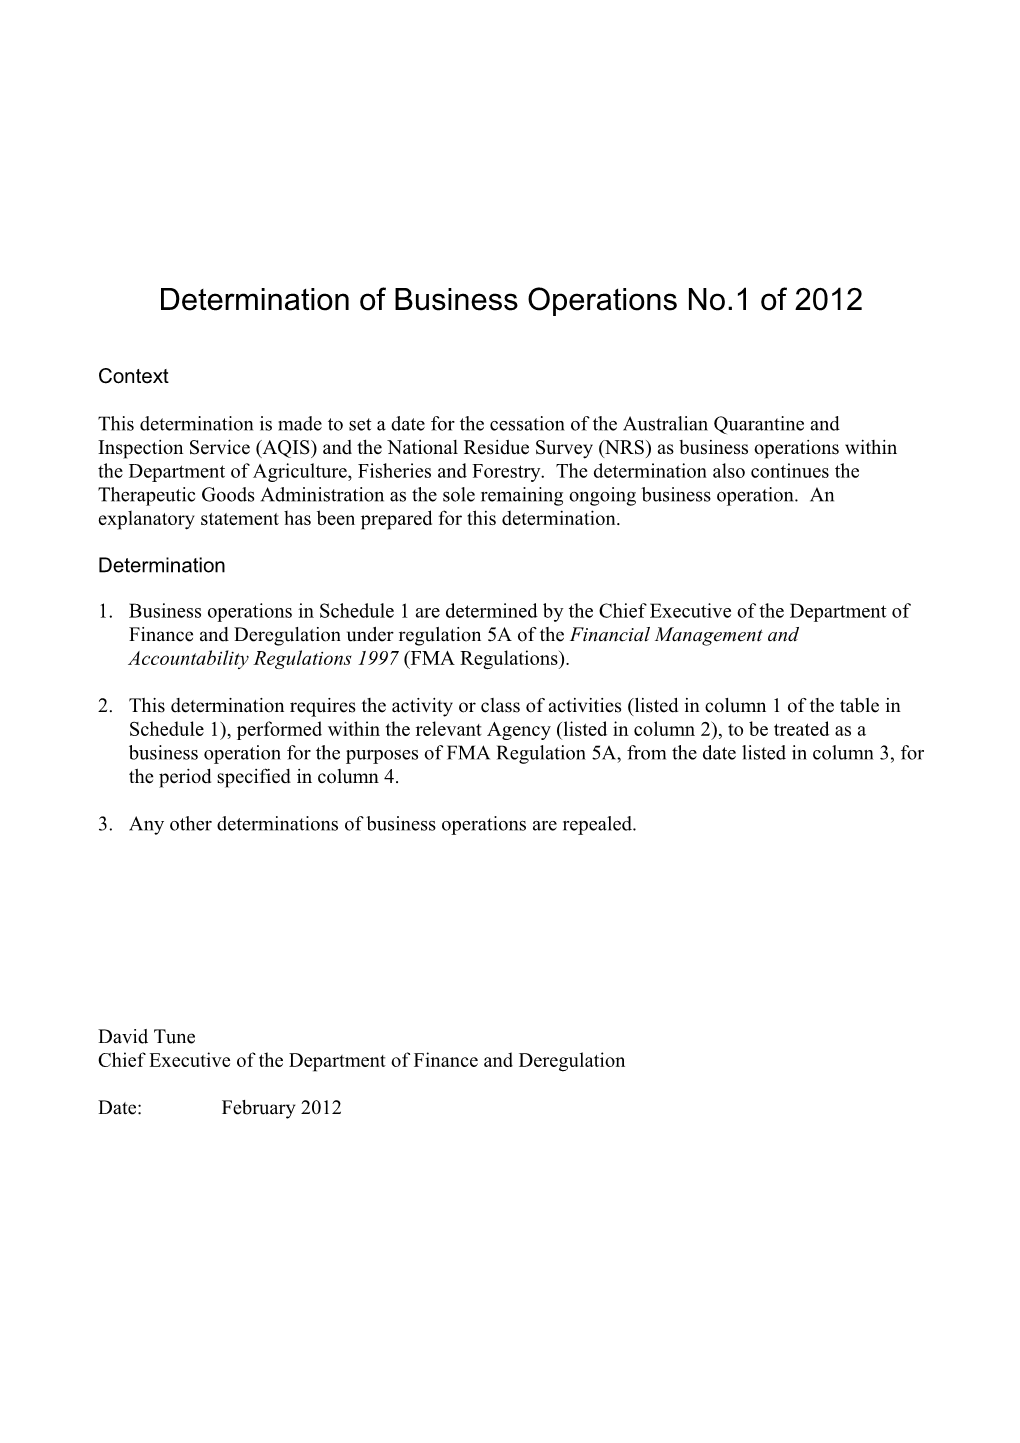 Determination of Business Operations Under Financial Management and Accountability Regulations